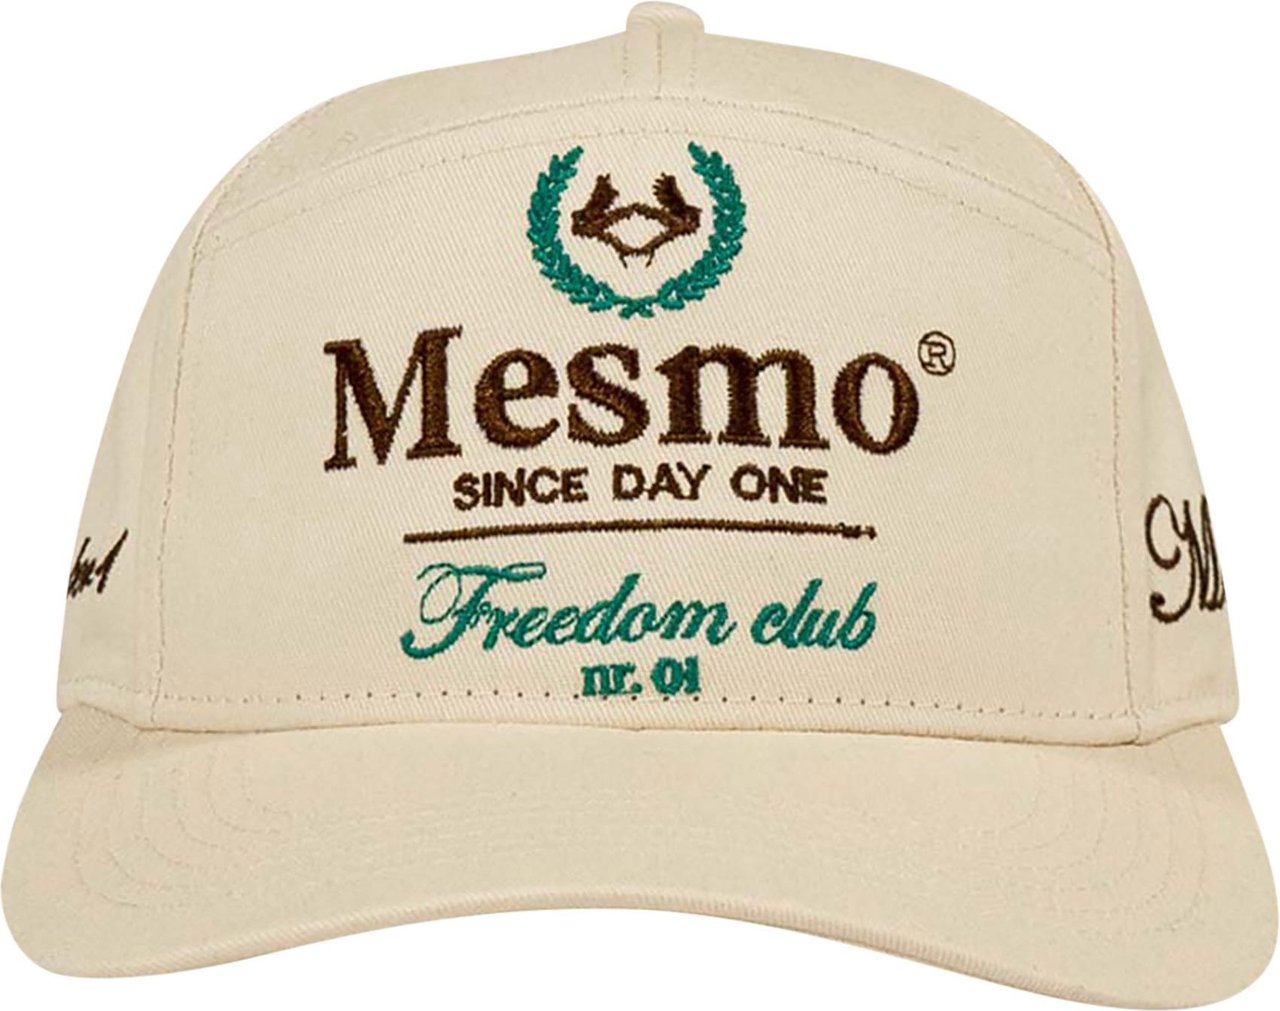 MESMO Freedom Club Hat Wit